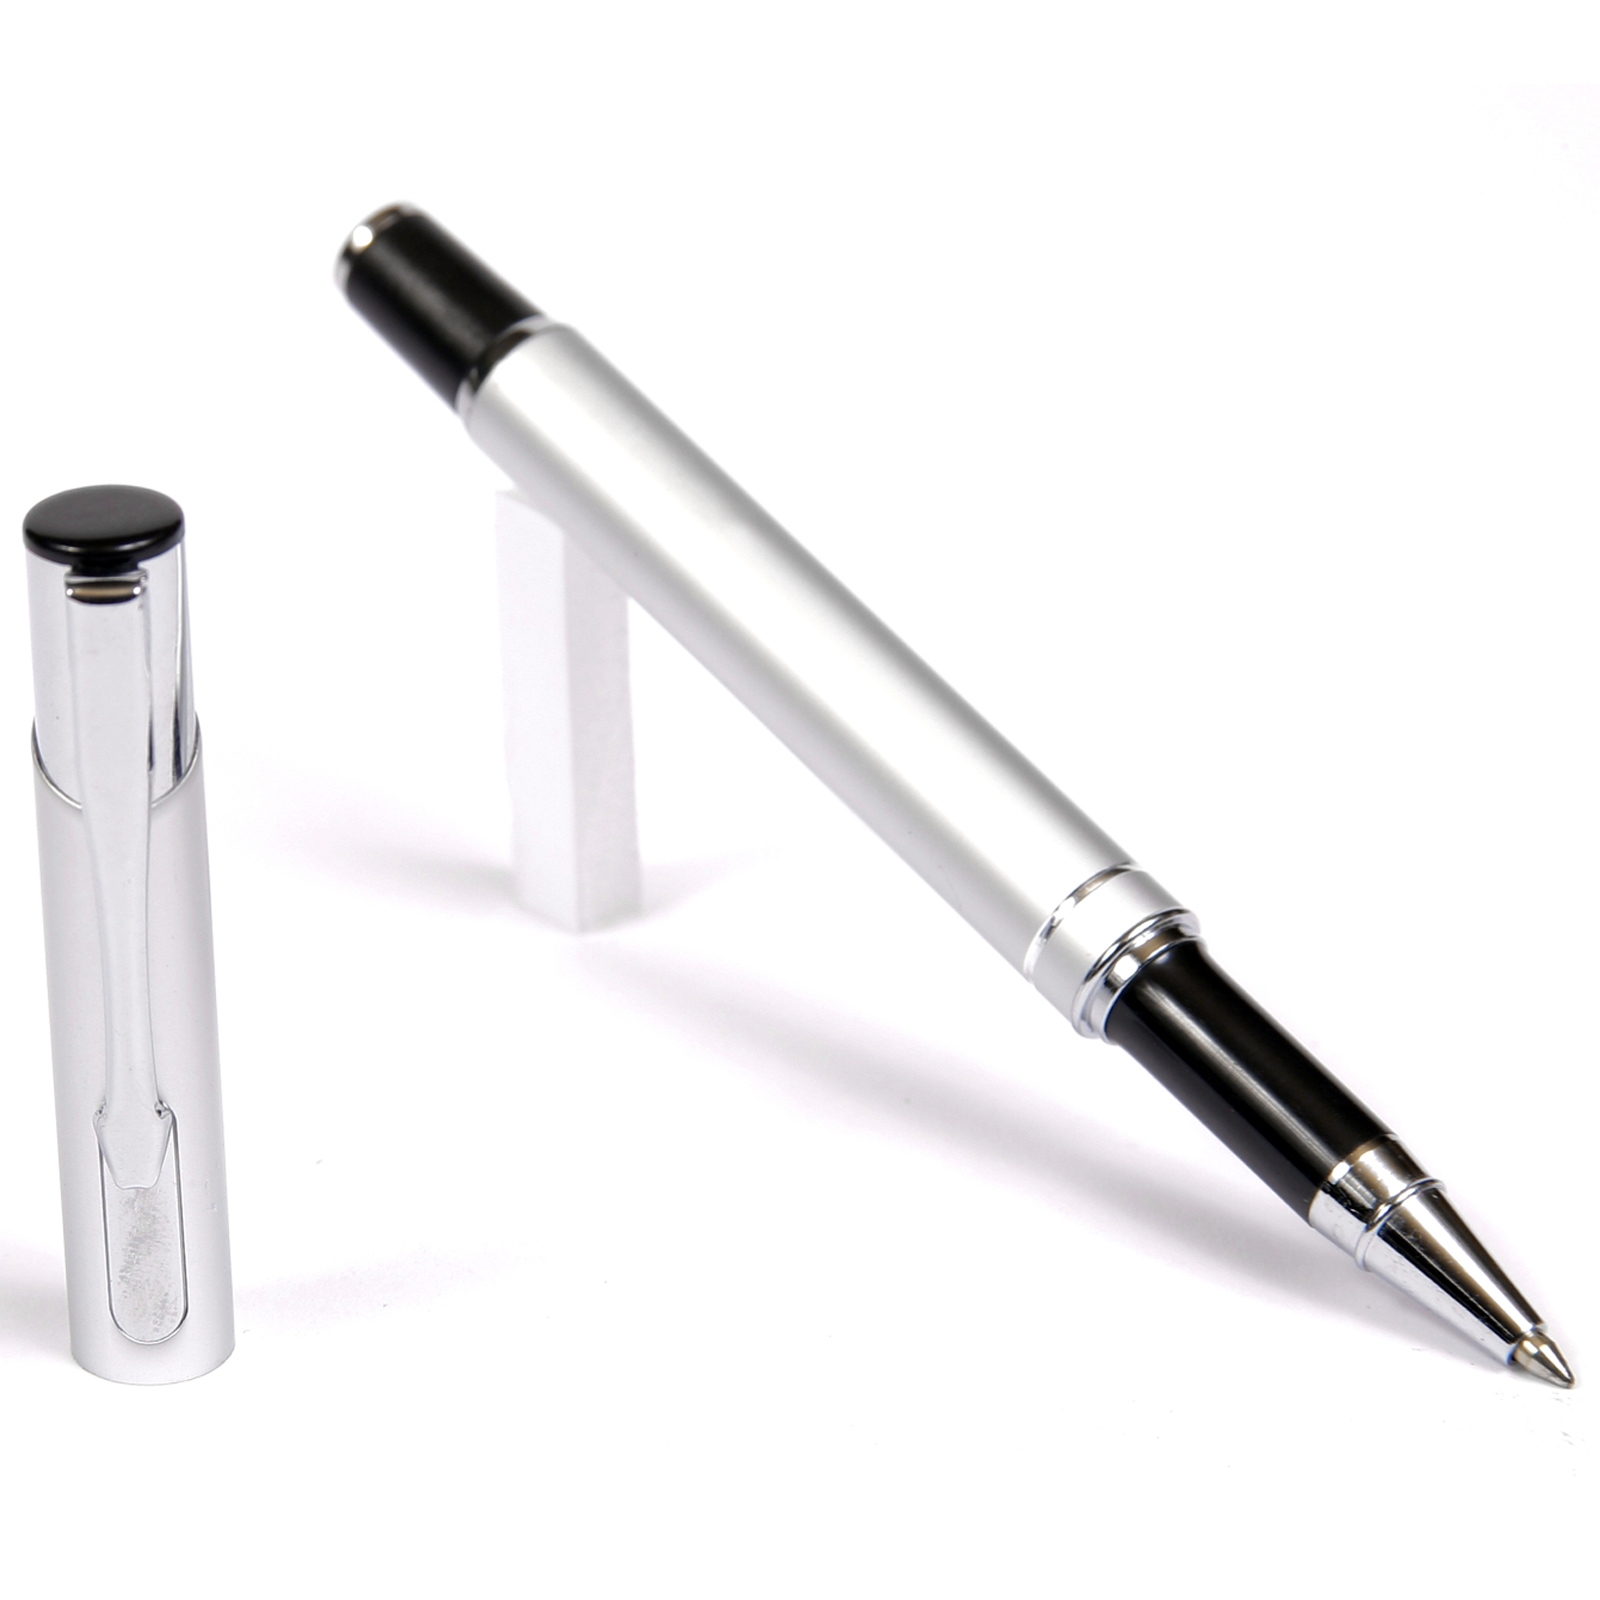 Budget Friendly JJ Rollerball Pen - Silver with Medium Tip Point By Lanier Pens